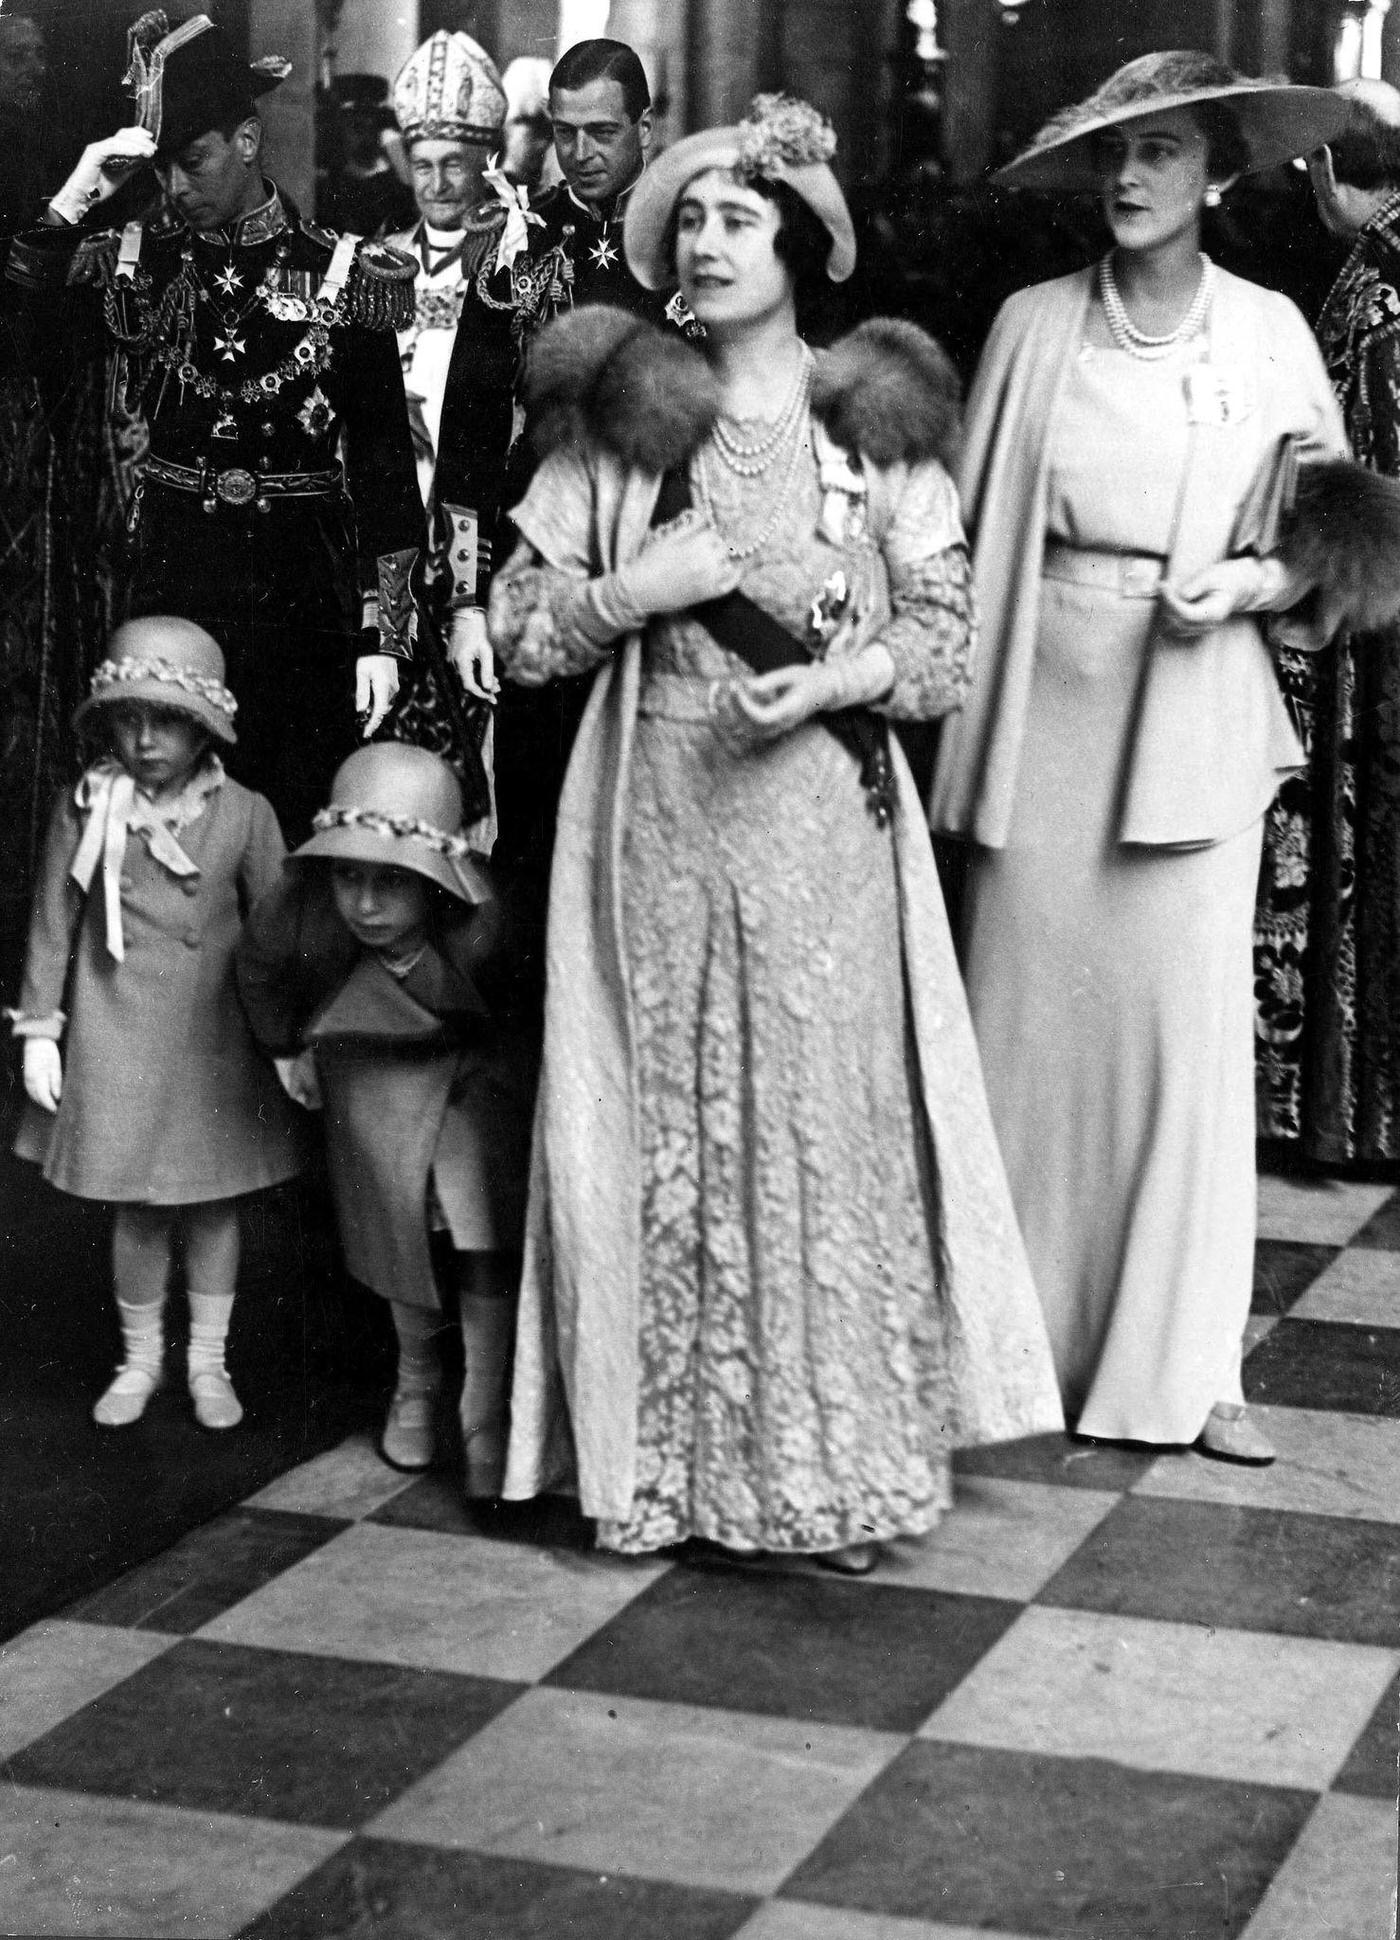 Duke and Duchess of York (later King George VI and Queen Elizabeth) with their daughters Margaret and Elizabeth, and the Duke and Duchess of Kent during celebrations of King George V's silver jubilee.